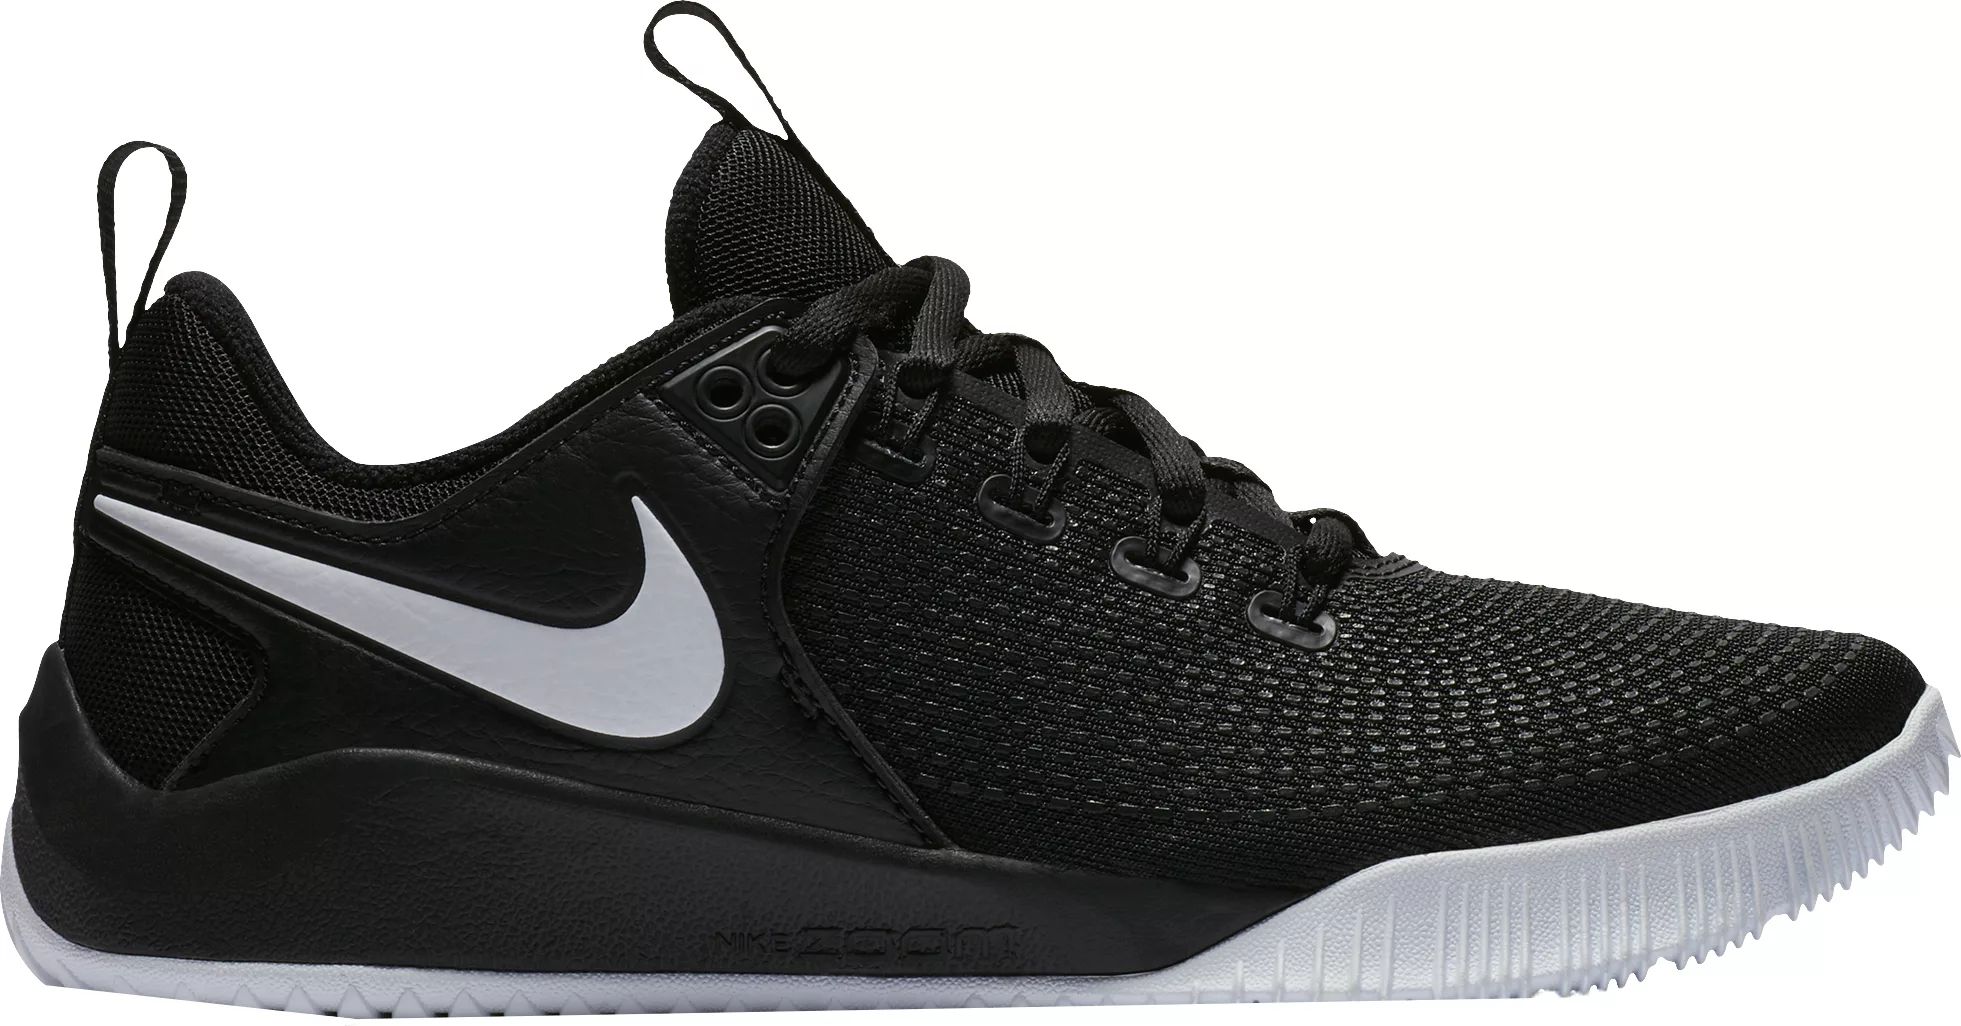 Women's Nike Zoom HyperAce 2 Volleyball Shoes, Size: 5.0, Black/White | Dick's Sporting Goods